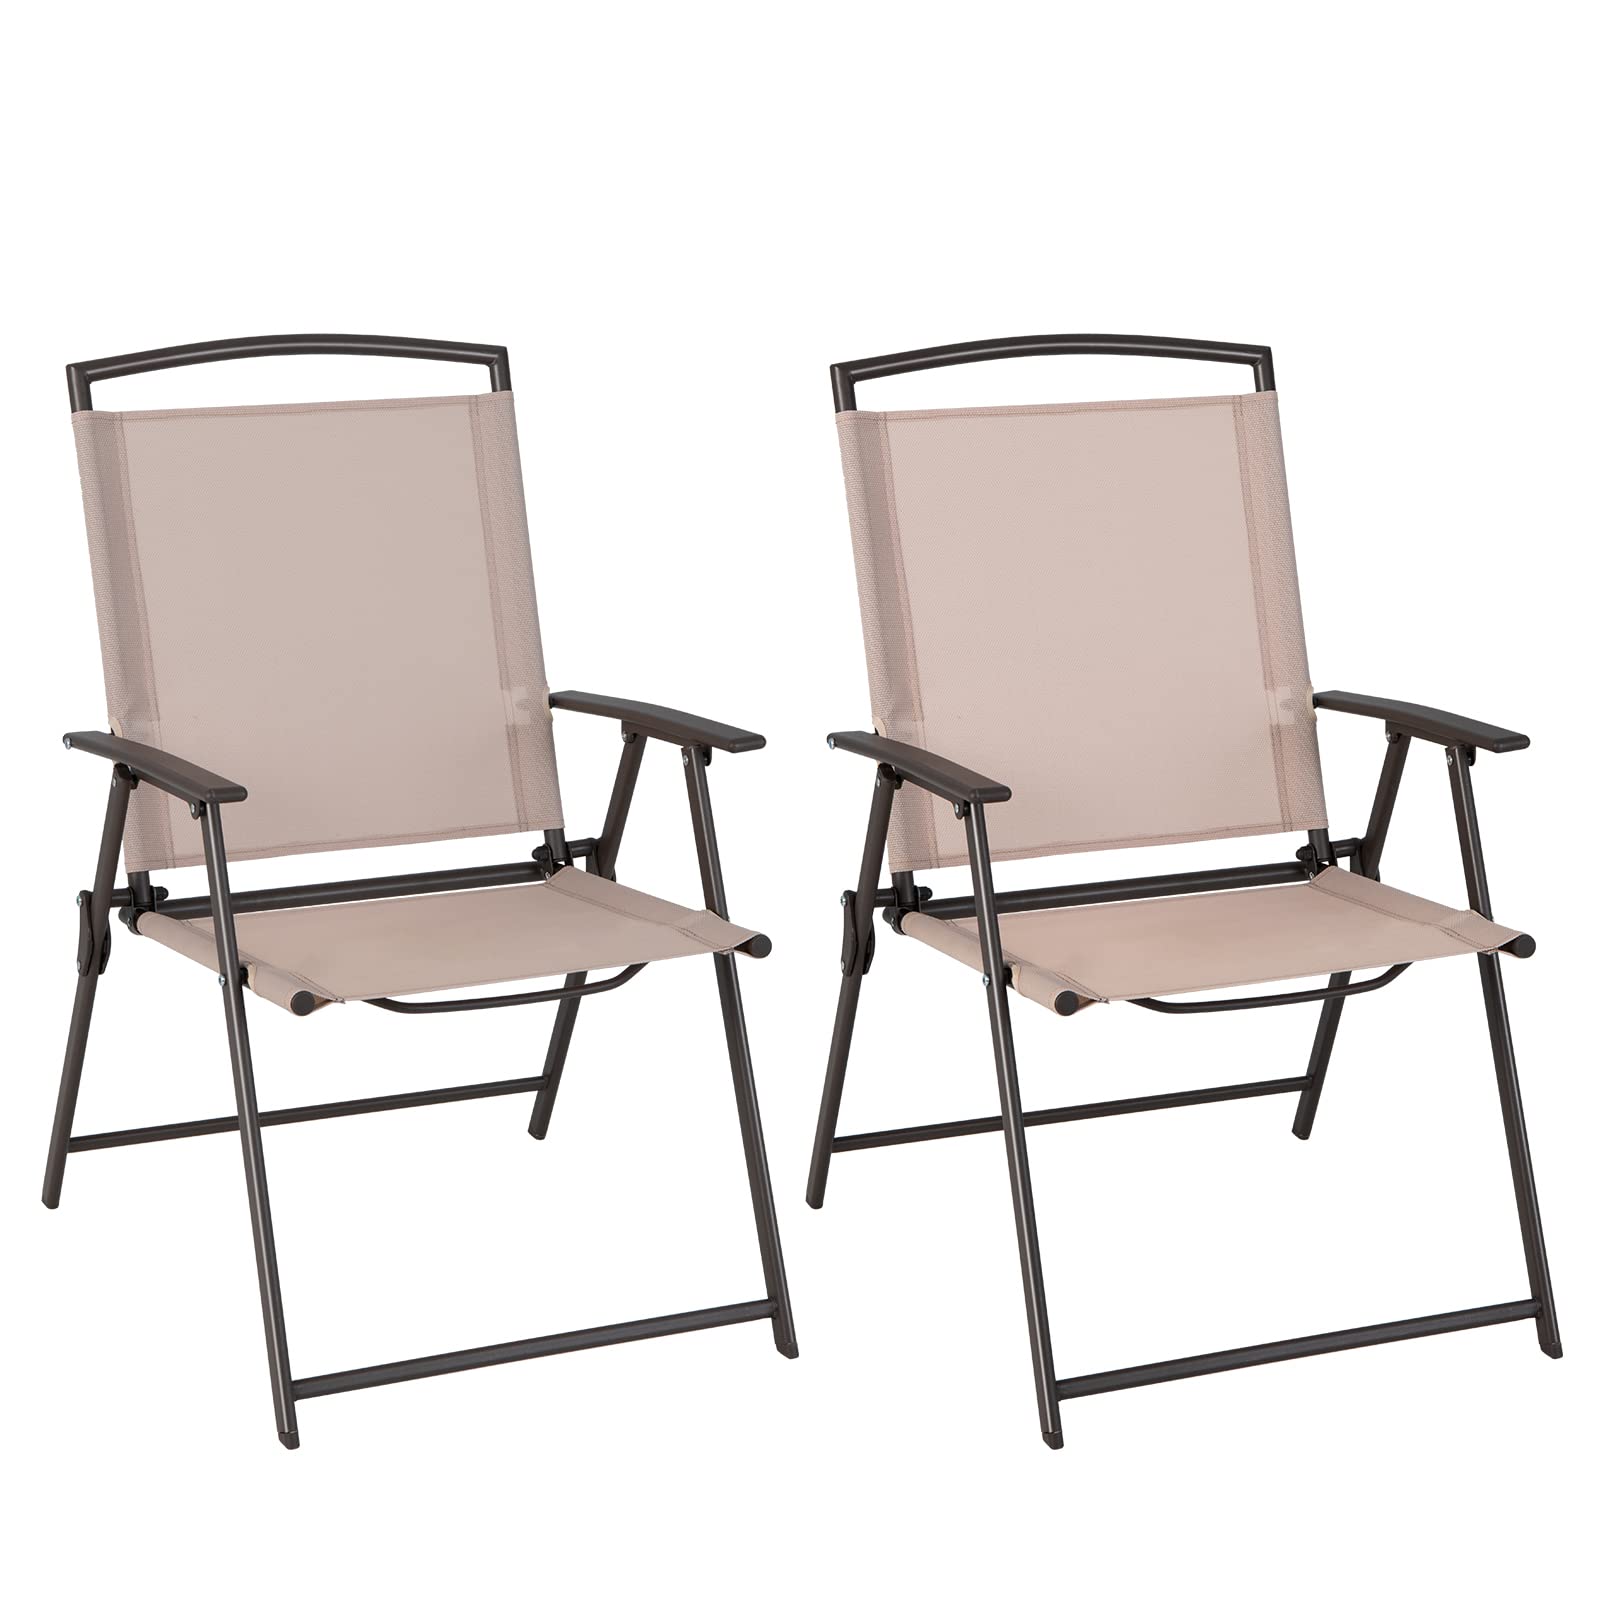 Giantex Set of 4 Patio Folding Chairs - Outdoor Sling Chairs